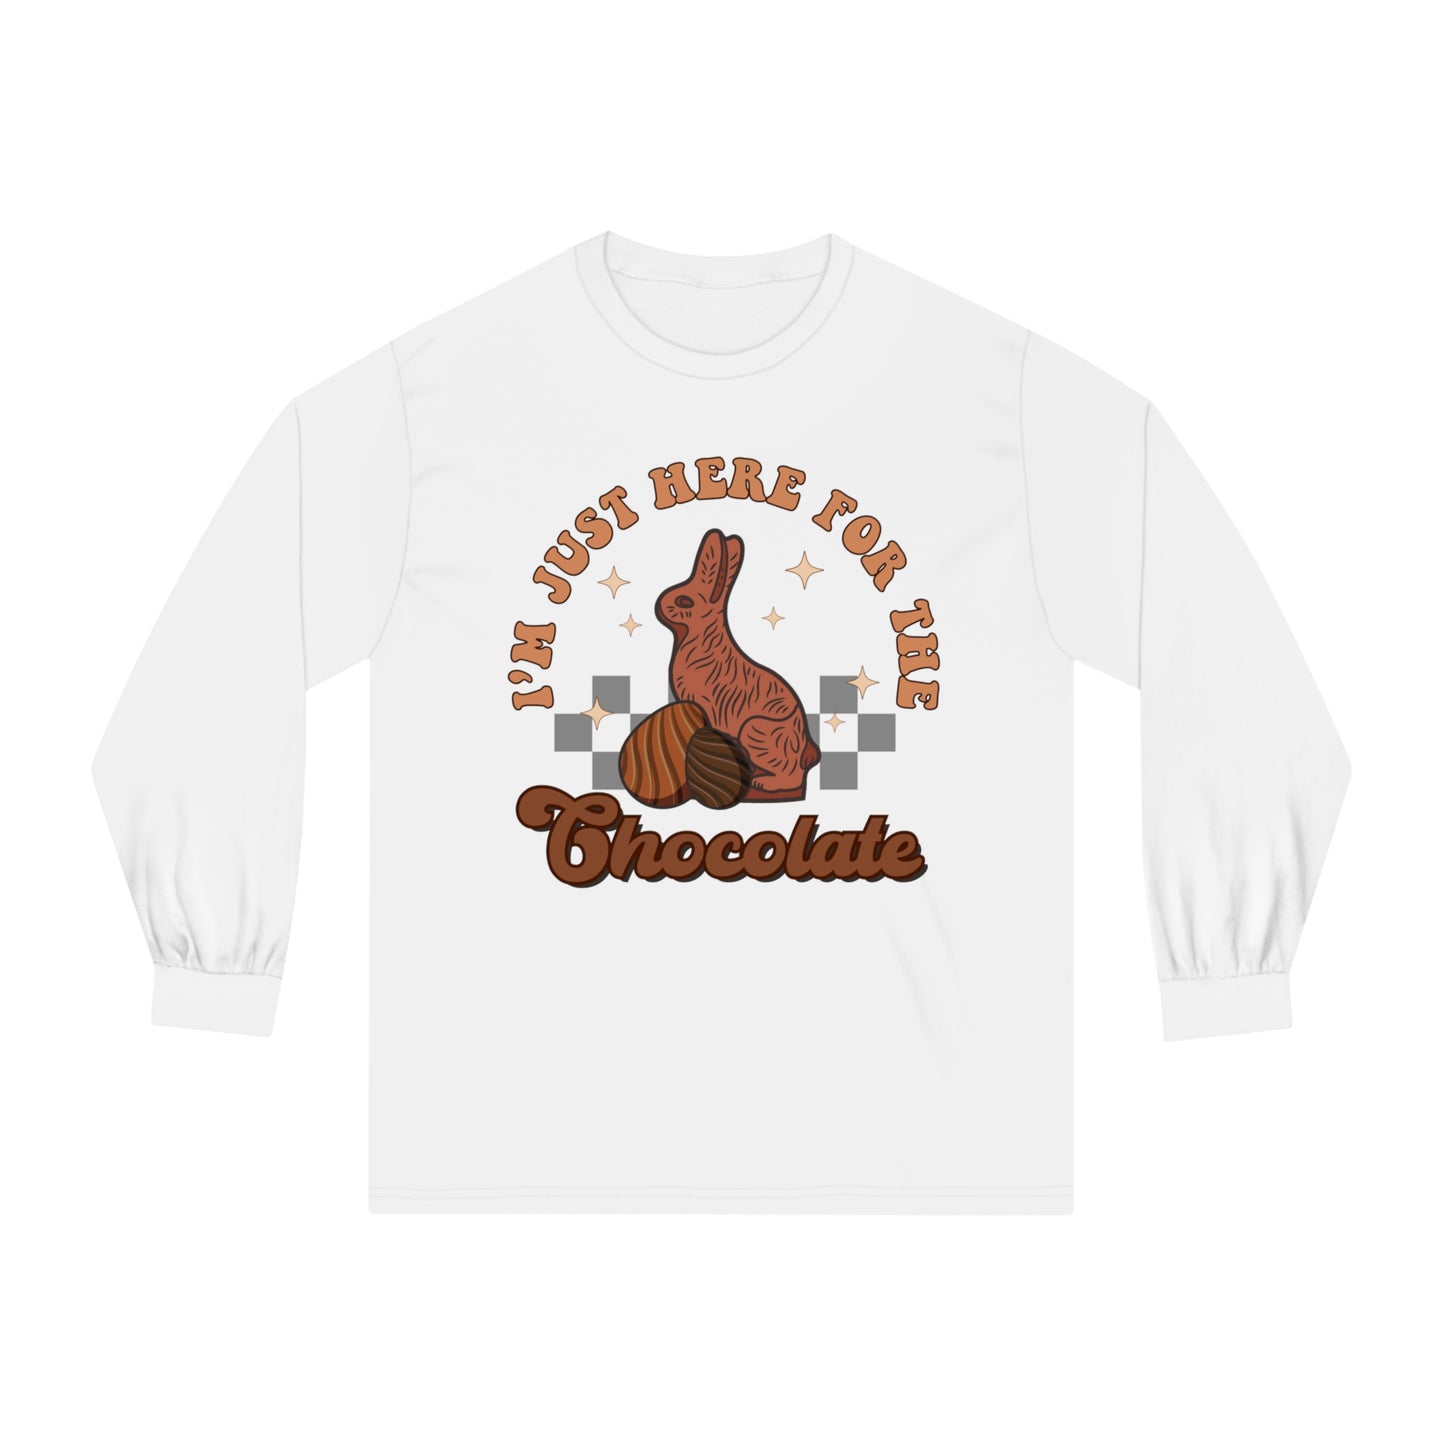 I'm Just Here for the Chocolate - Unisex Classic Long Sleeve T-Shirt